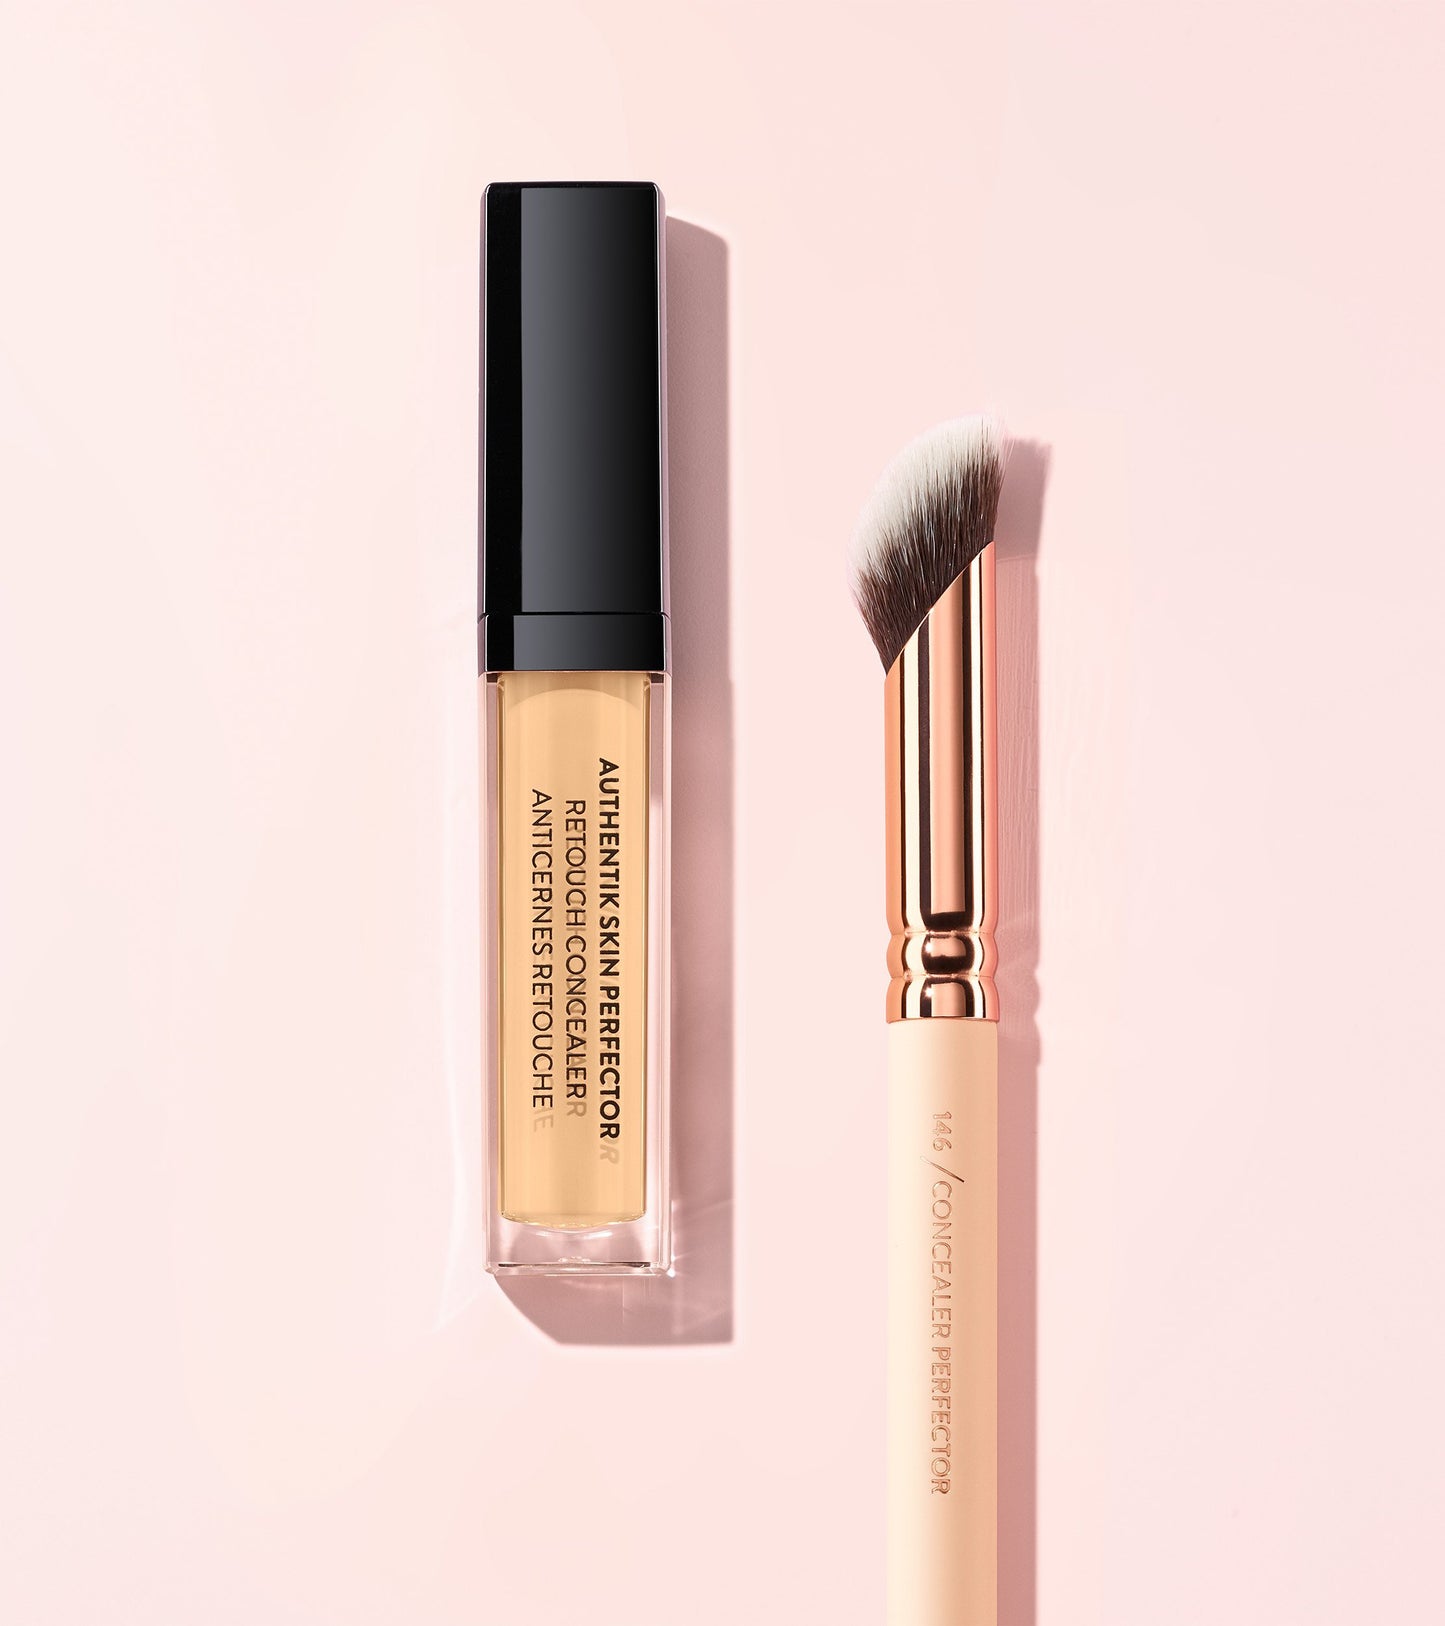 AUTHENTIK SKIN PERFECTOR CONCEALER (200 PRESENT) Expanded Image 3